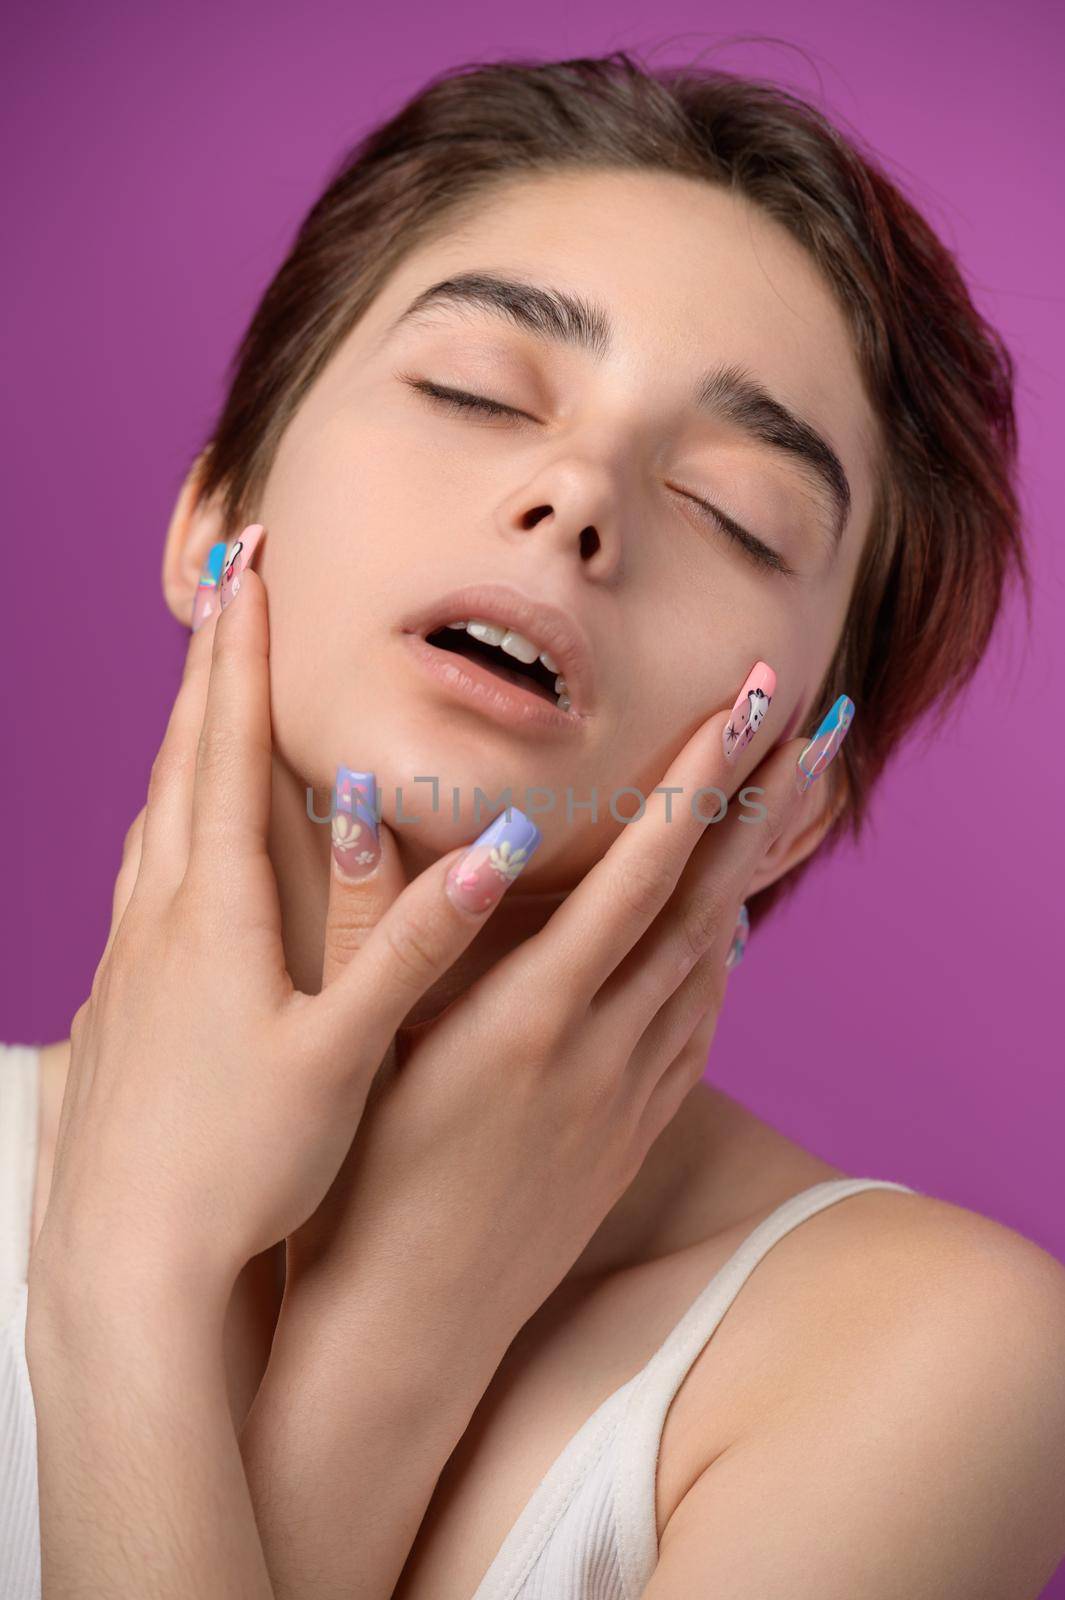 Sensual pretty girl with short haircut and extravagant nail art by starush